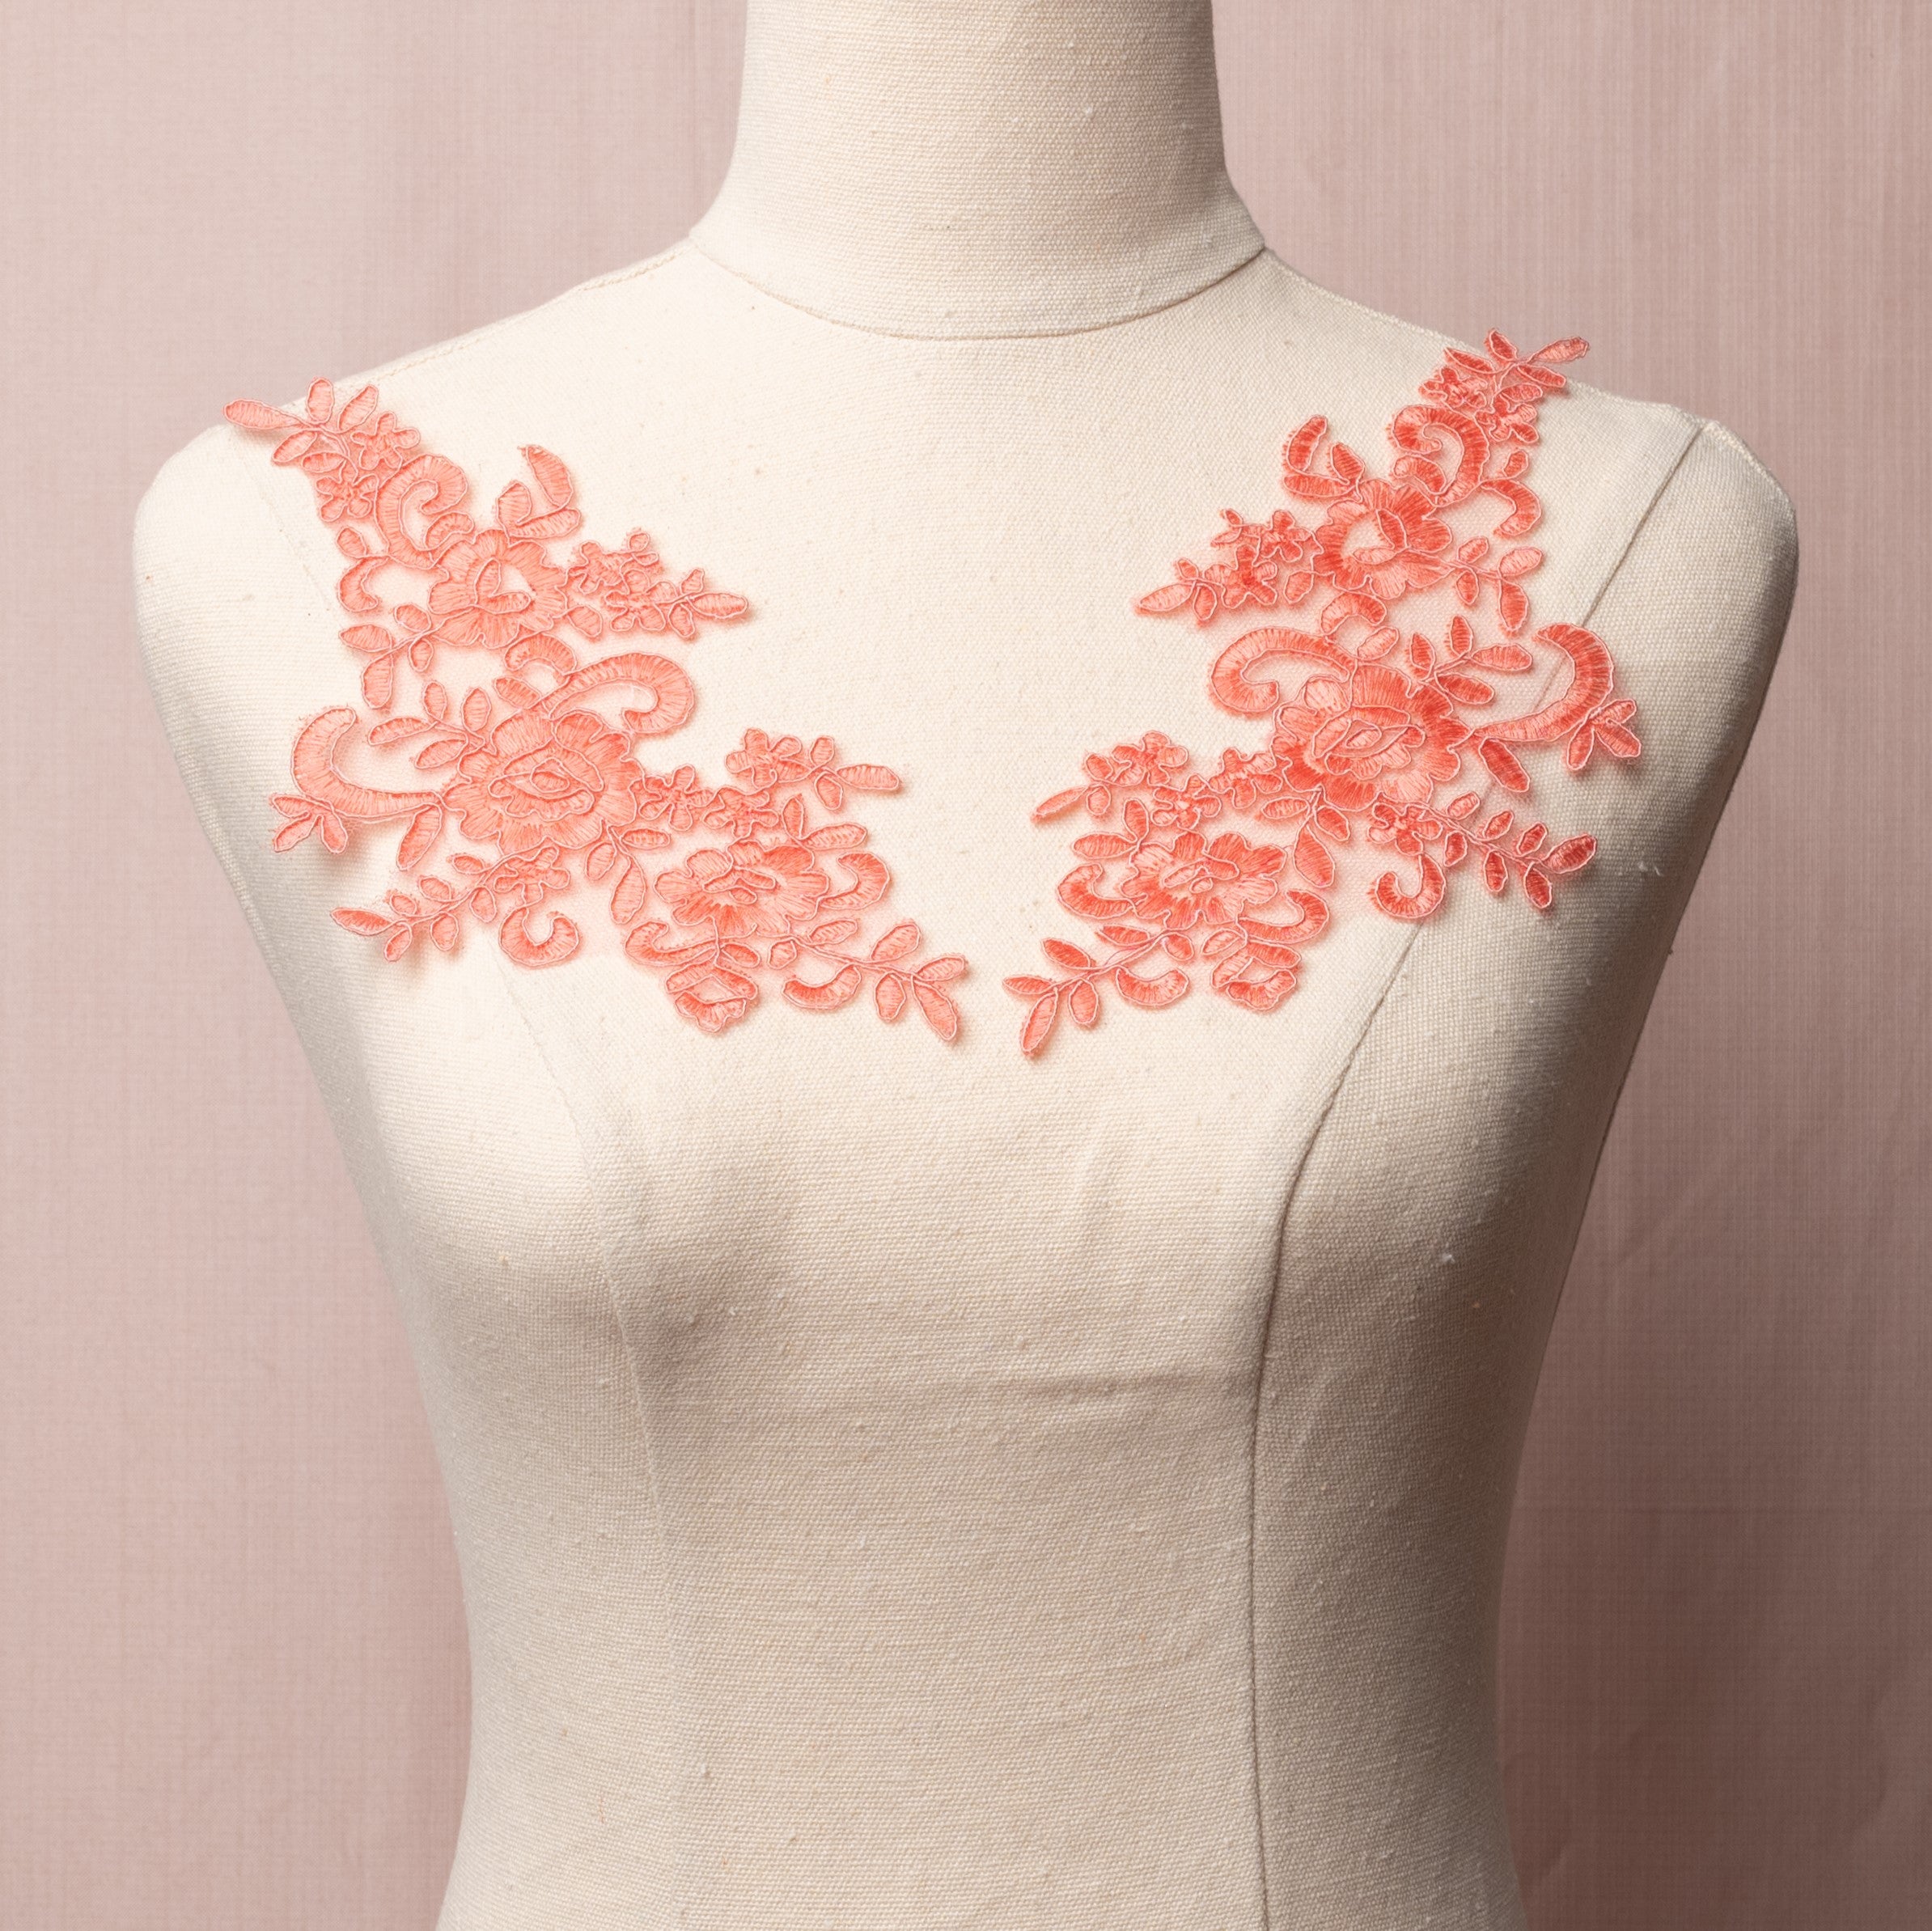 Coral pink floral corded applique pair embroidered onto a fine net backing.  The applique pair is displayed on a mannequin.